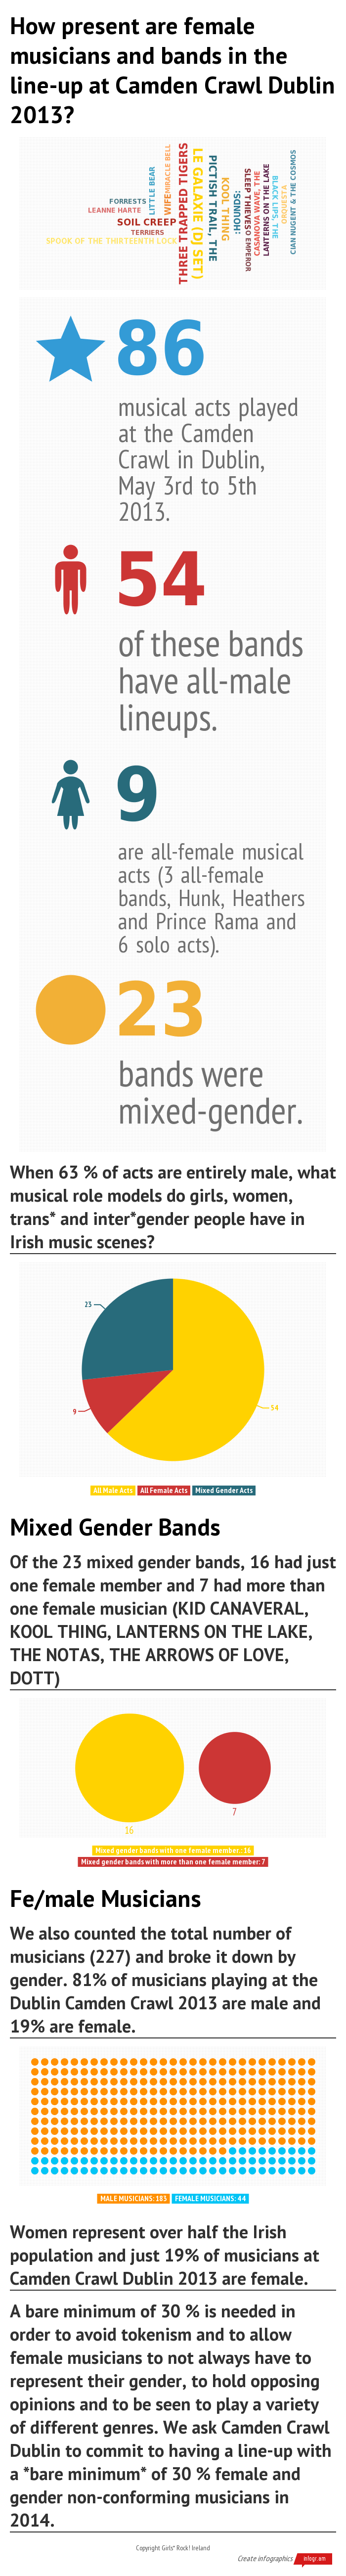 How-present-are-female-music-1.png